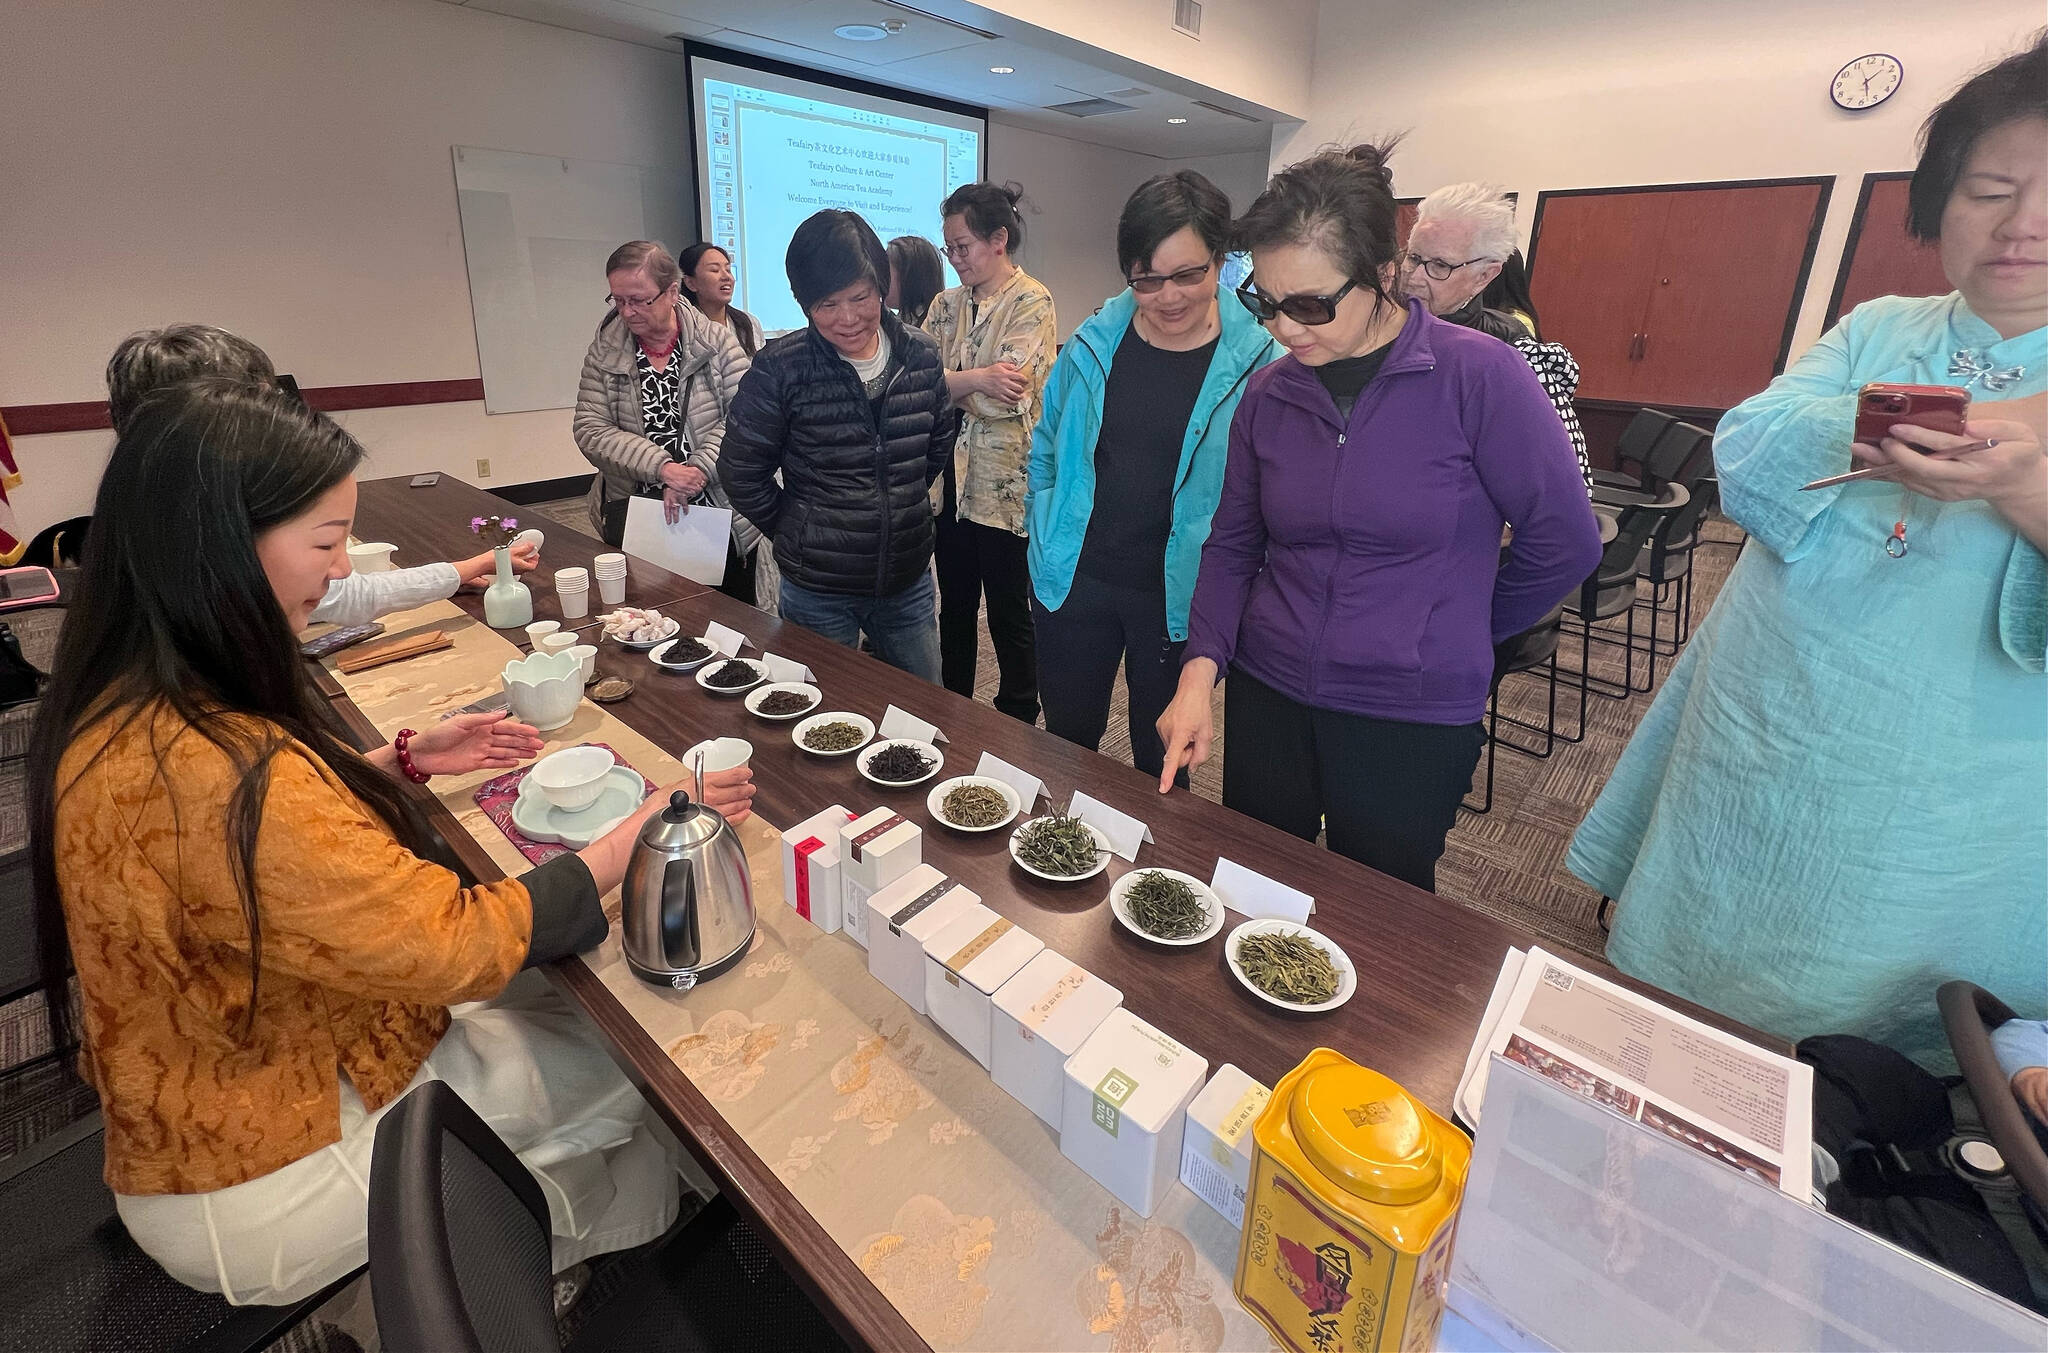 Attendees line up for a tea tasting at the Mercer Island Chinese Association event on April 17 at the Mercer Island Library. Photo courtesy of Fan Yuan